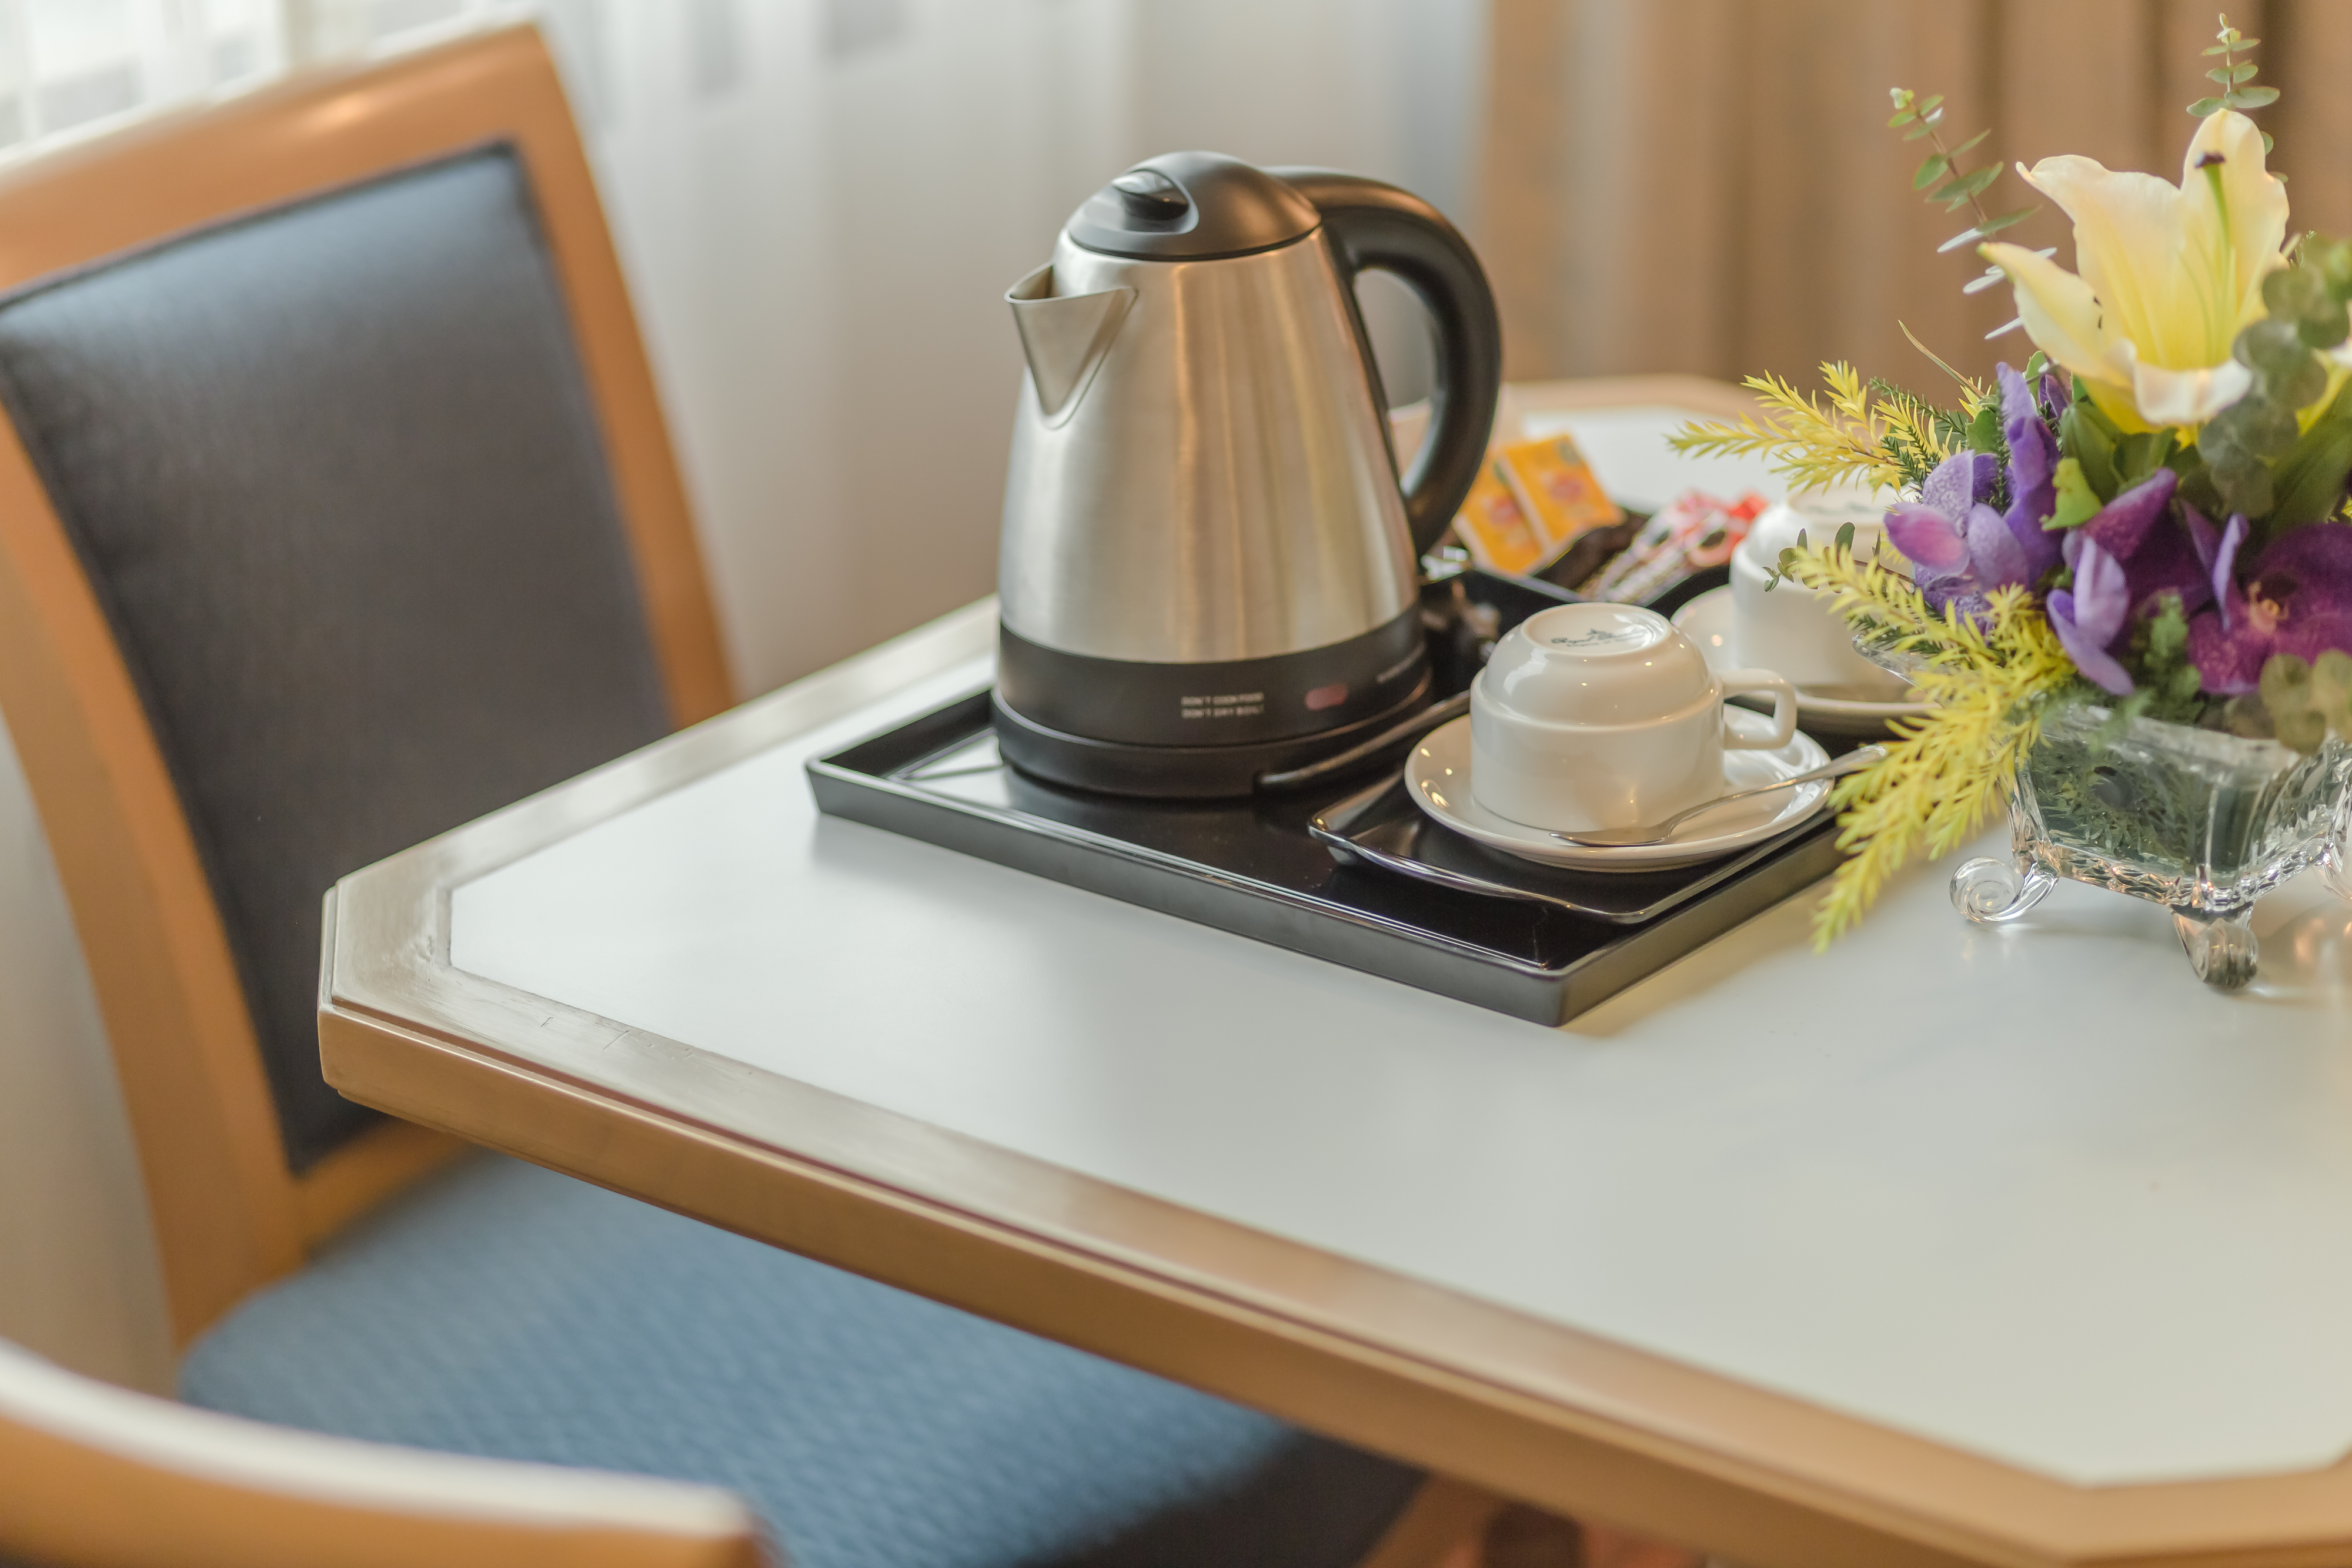 A hotel room teapot and cup | Source: Shutterstock